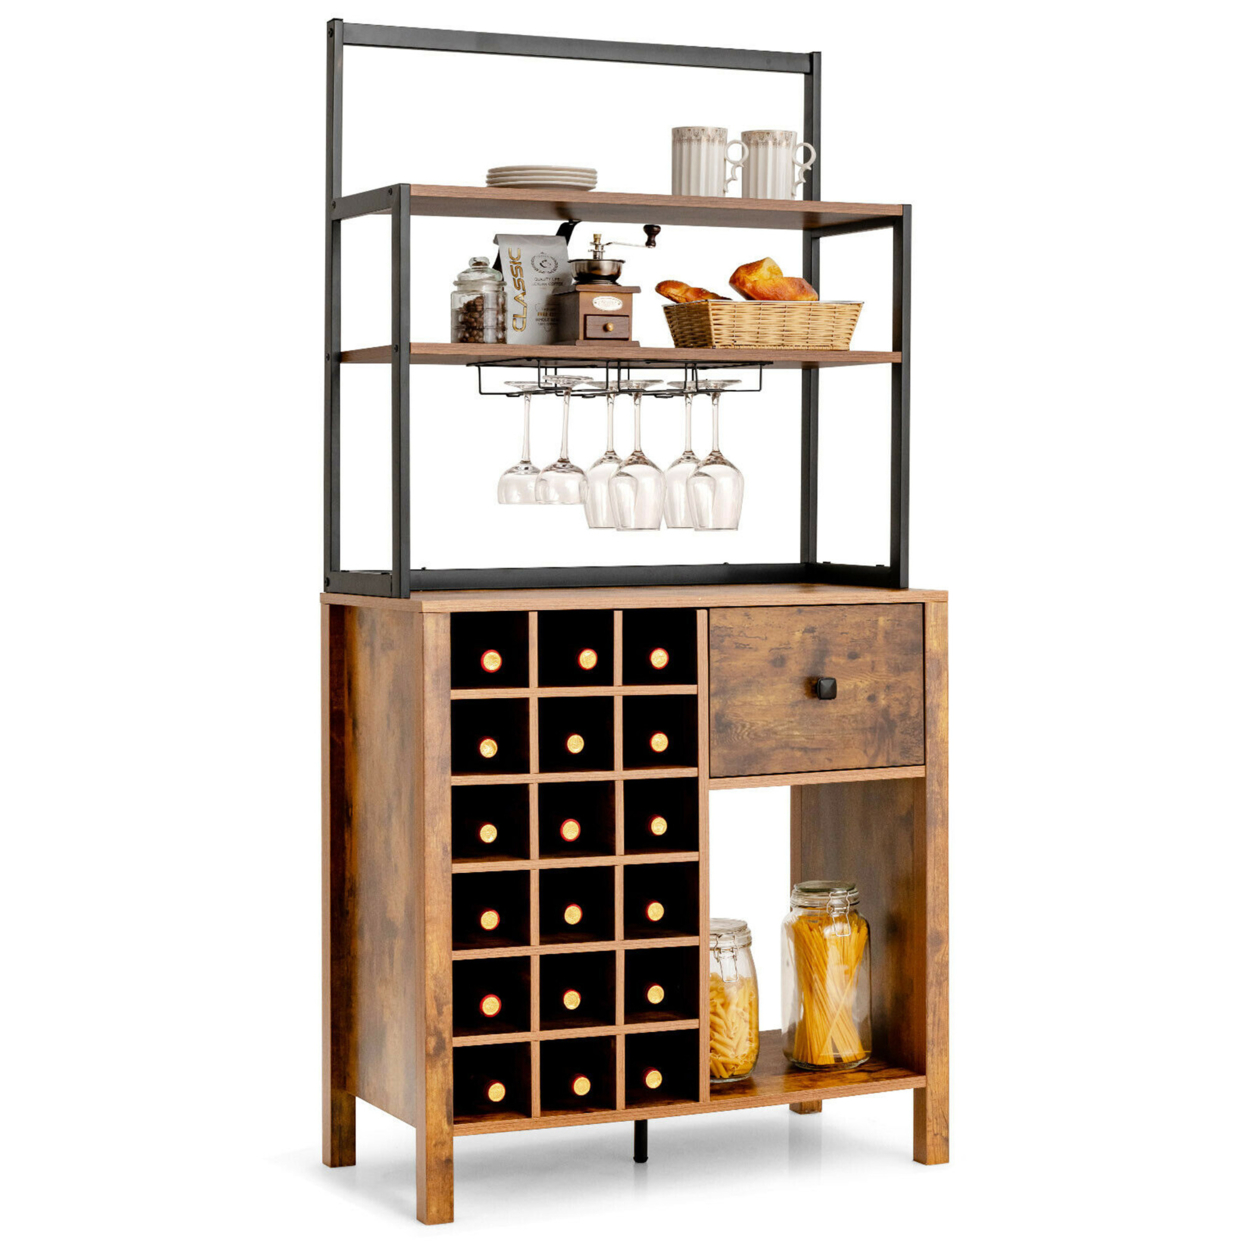 Gymax Kitchen Bakers Rack Freestanding Wine Rack Table w/ Glass Holder & Drawer Black / Rustic - Rustic